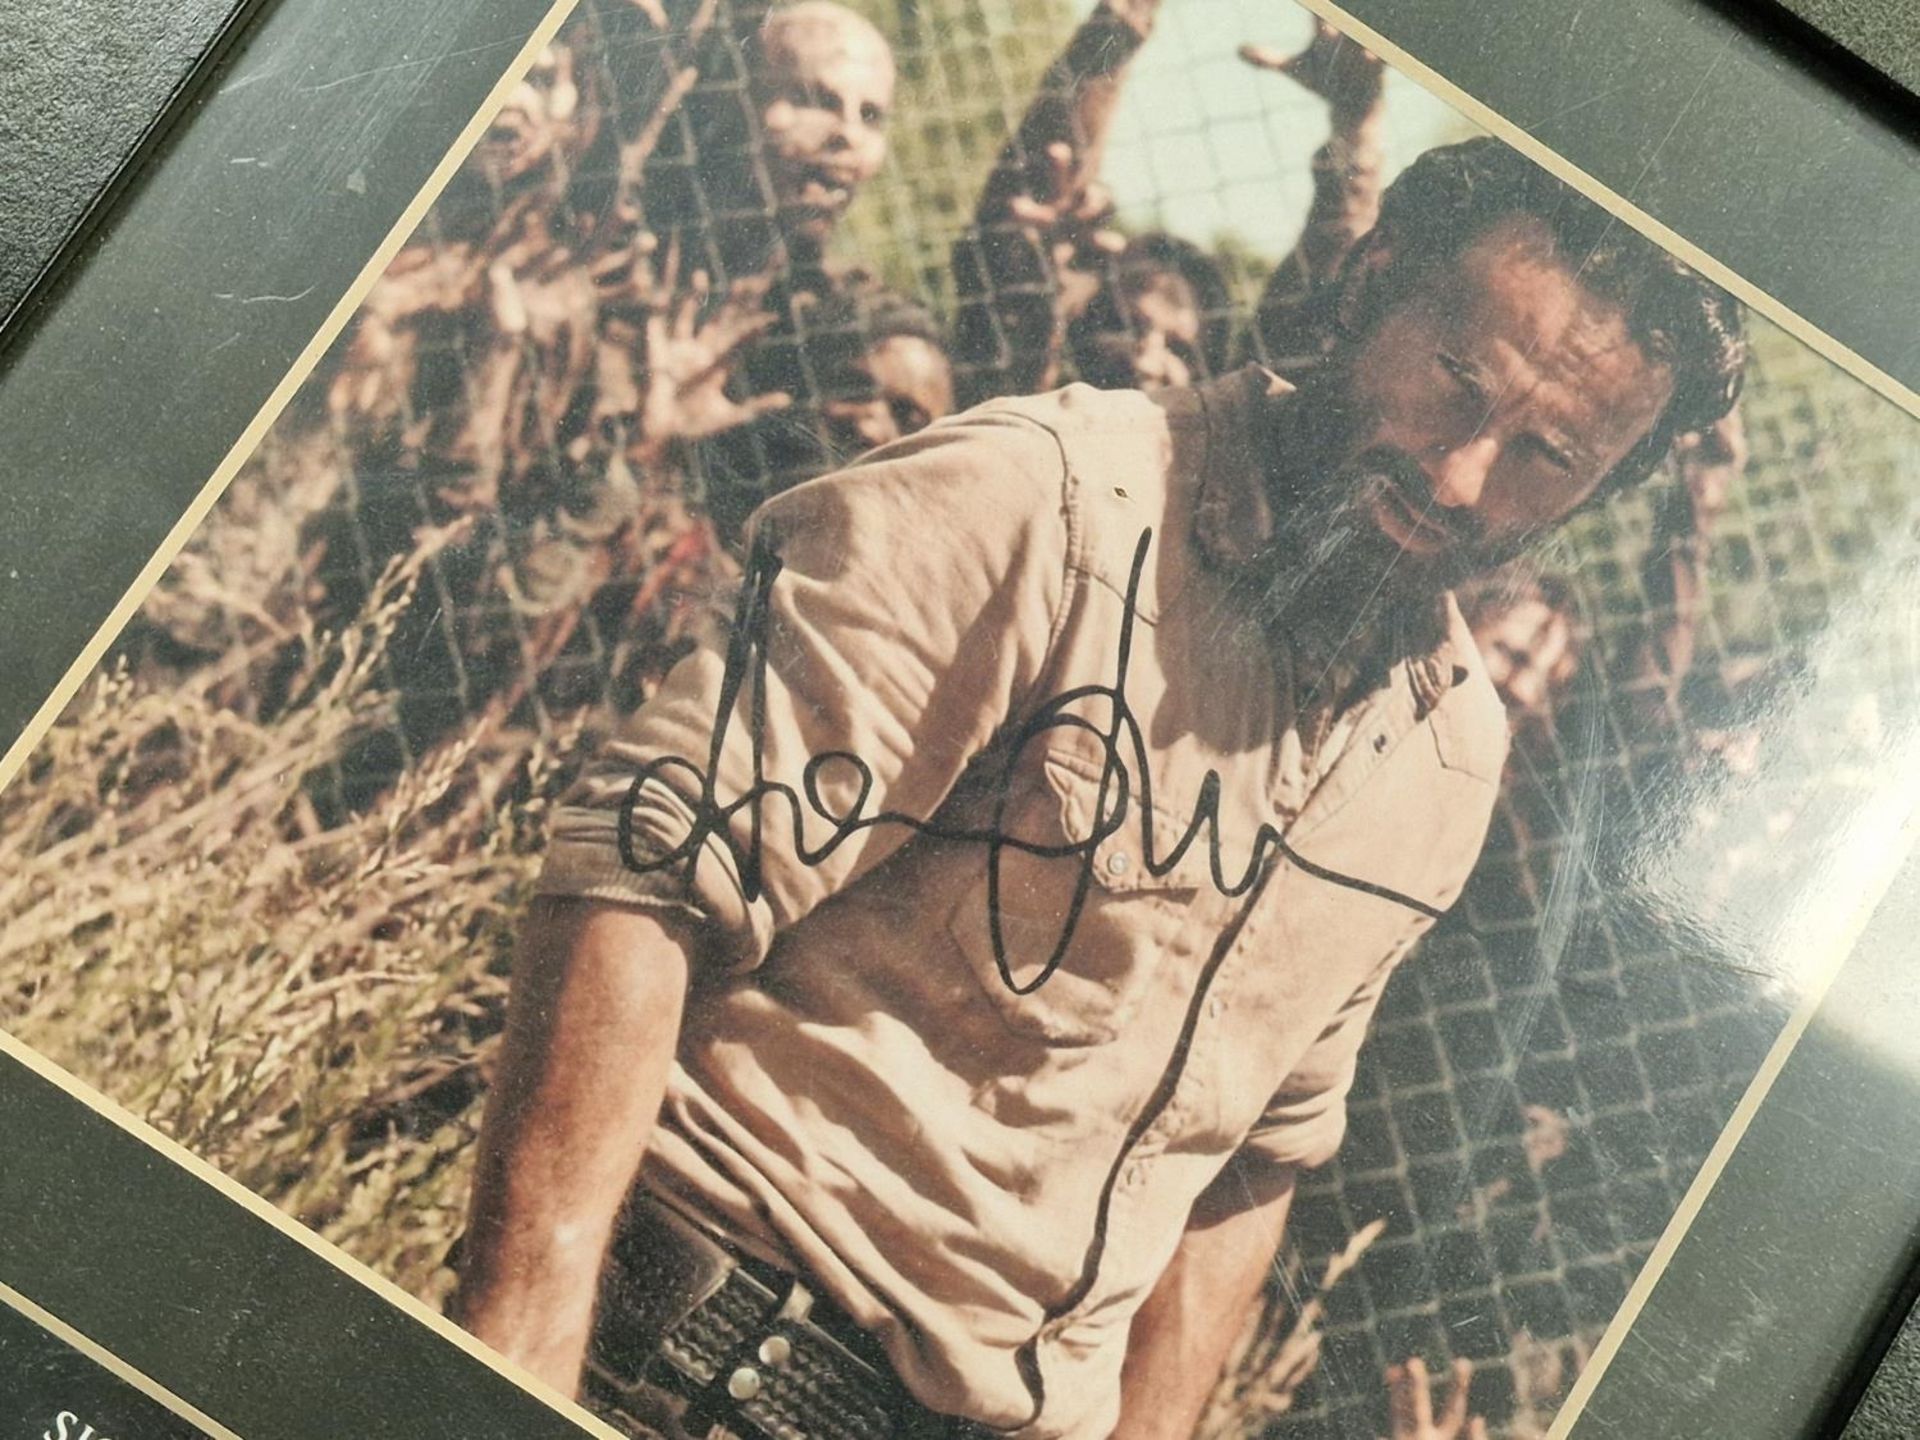 Framed unauthenticated Andrew Lincoln signed photograph 34x25cm. - Image 2 of 3